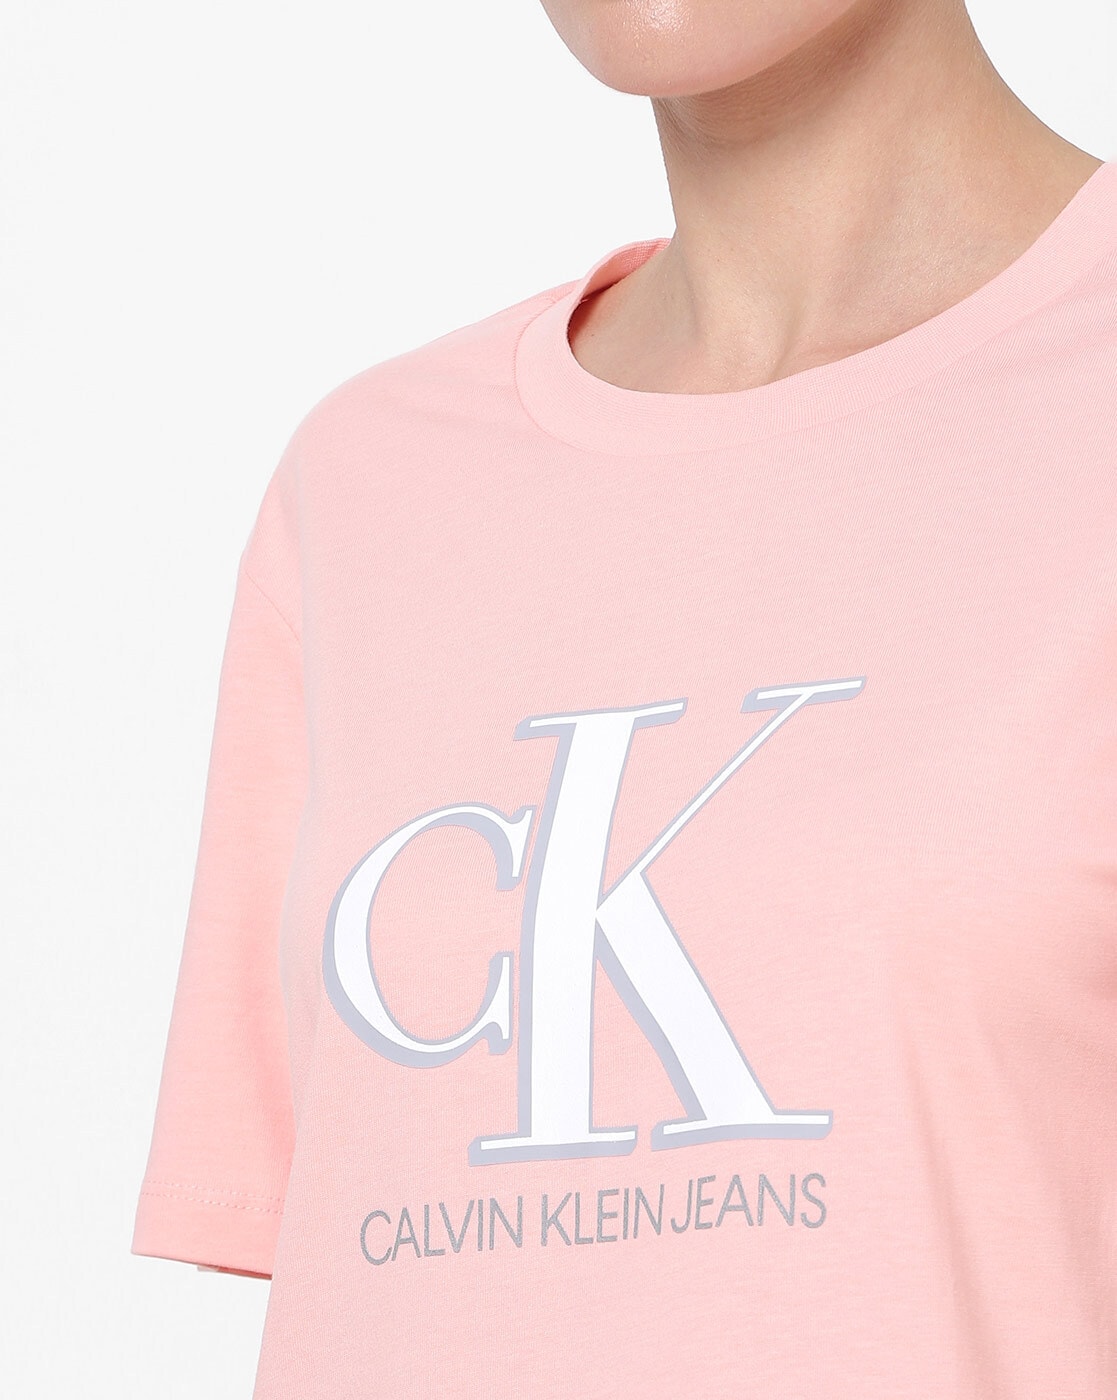 Buy Calvin by Women Jeans Klein Pink Tshirts Online for